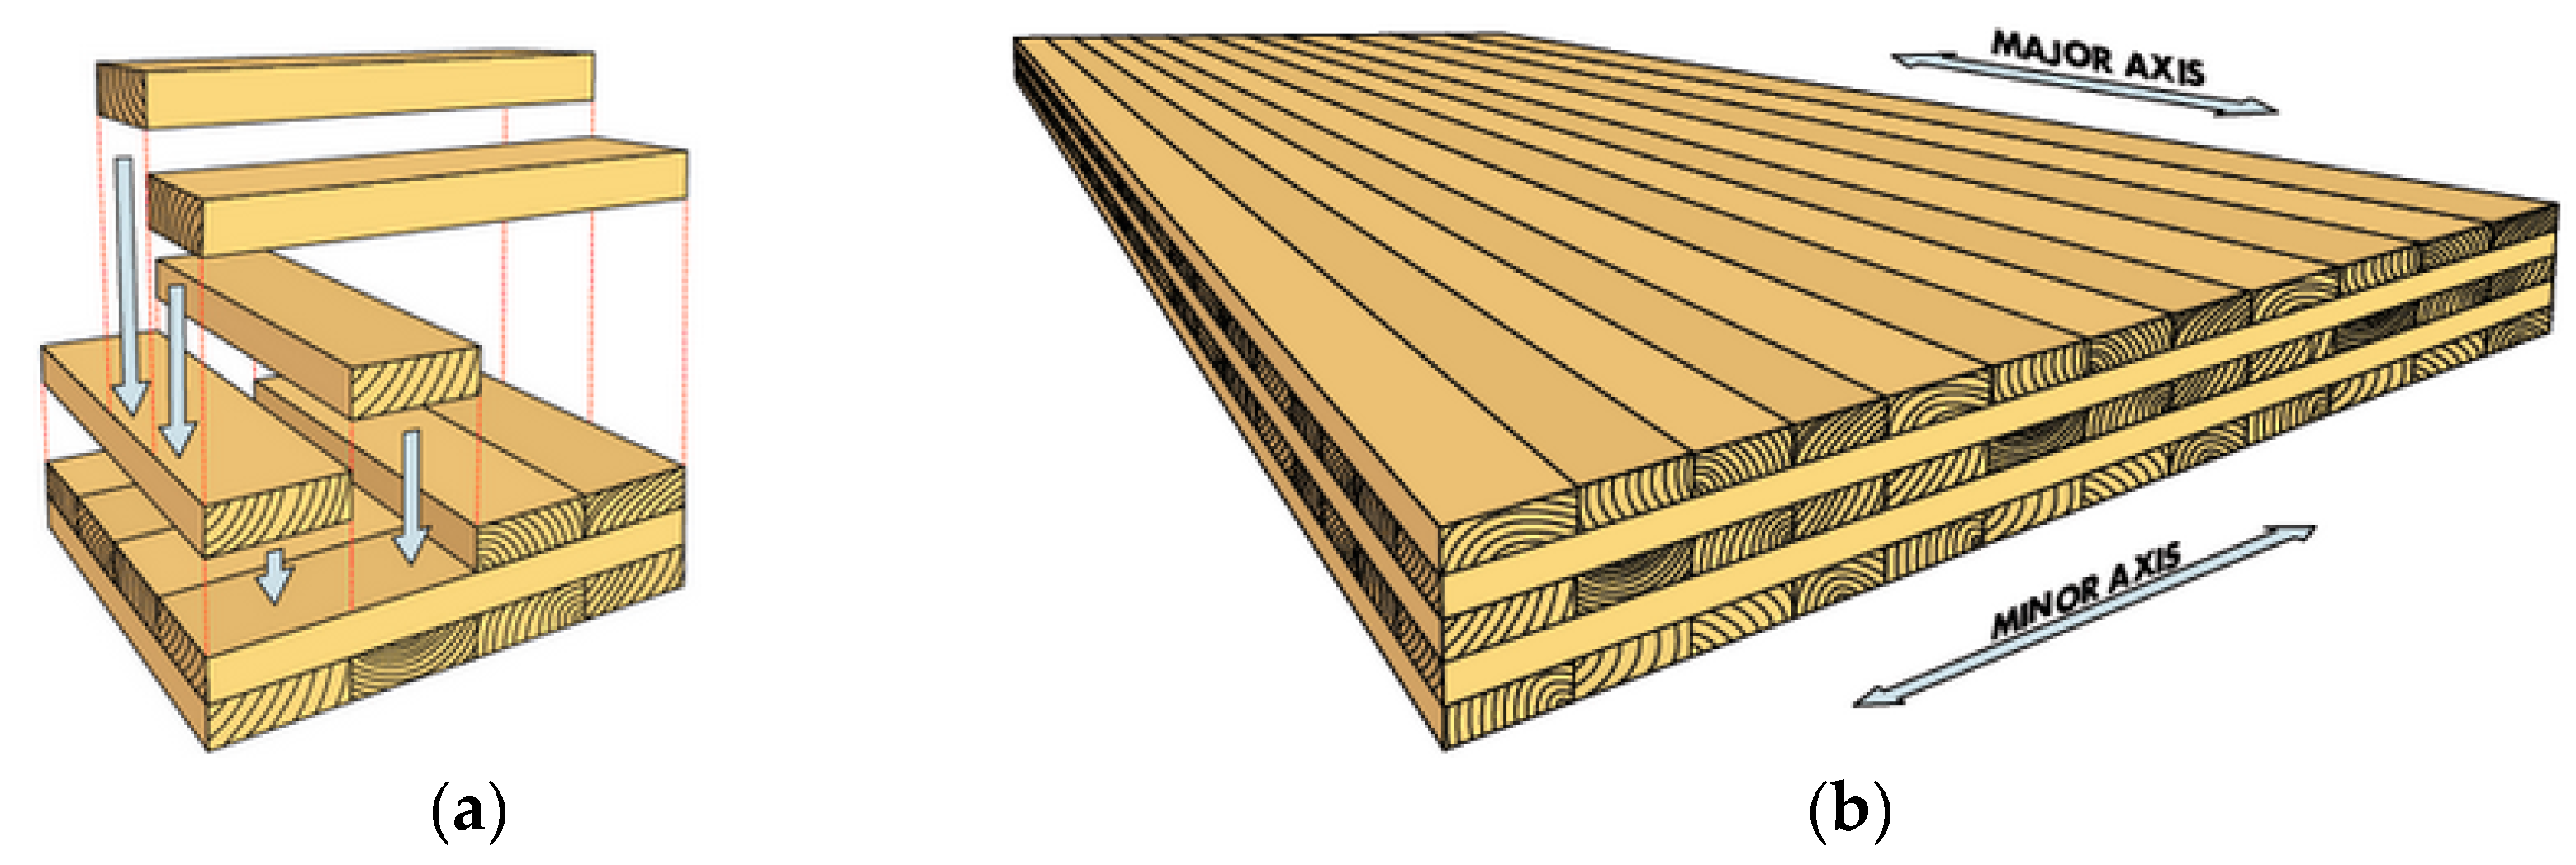 Forests | Free Full-Text | Is Cross-Laminated Timber (CLT) a Wood Panel, a Building, or a Construction System? A Systematic on Its Functions, Characteristics, and Applications